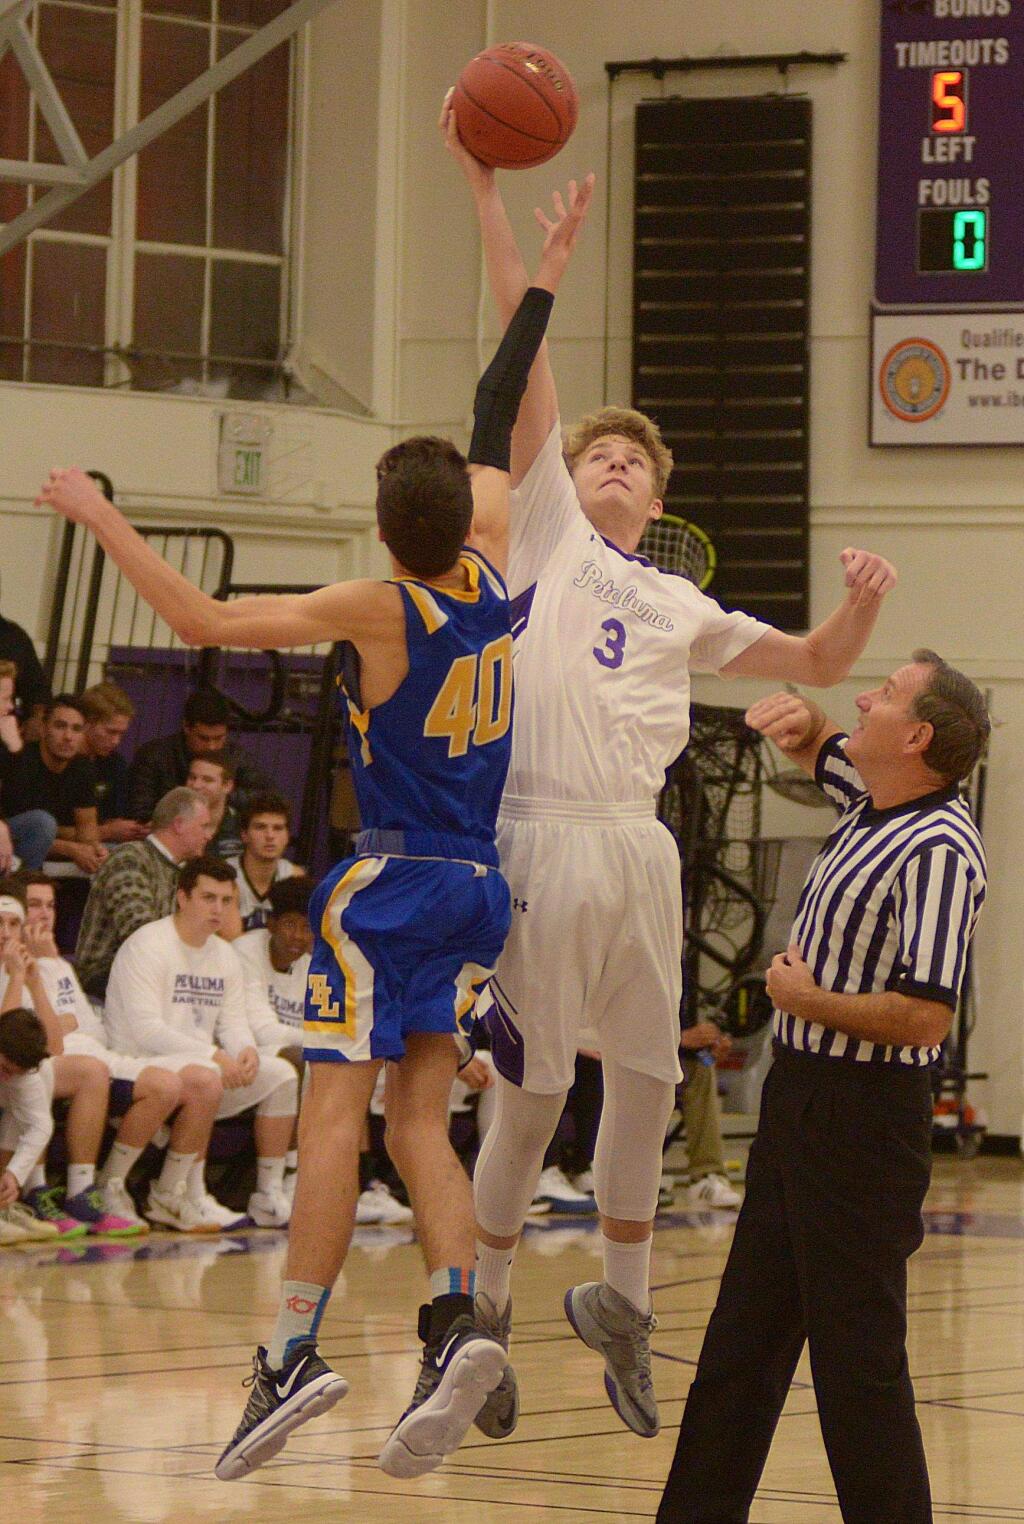 SUMNER FOWLER/FOR THE ARGUS-COURIERPetaluma started its season right with Jack Anderson winning the opening tip from Terrqa Linda's Reece Feehr. Petaluma went on to win the game, 69-40.